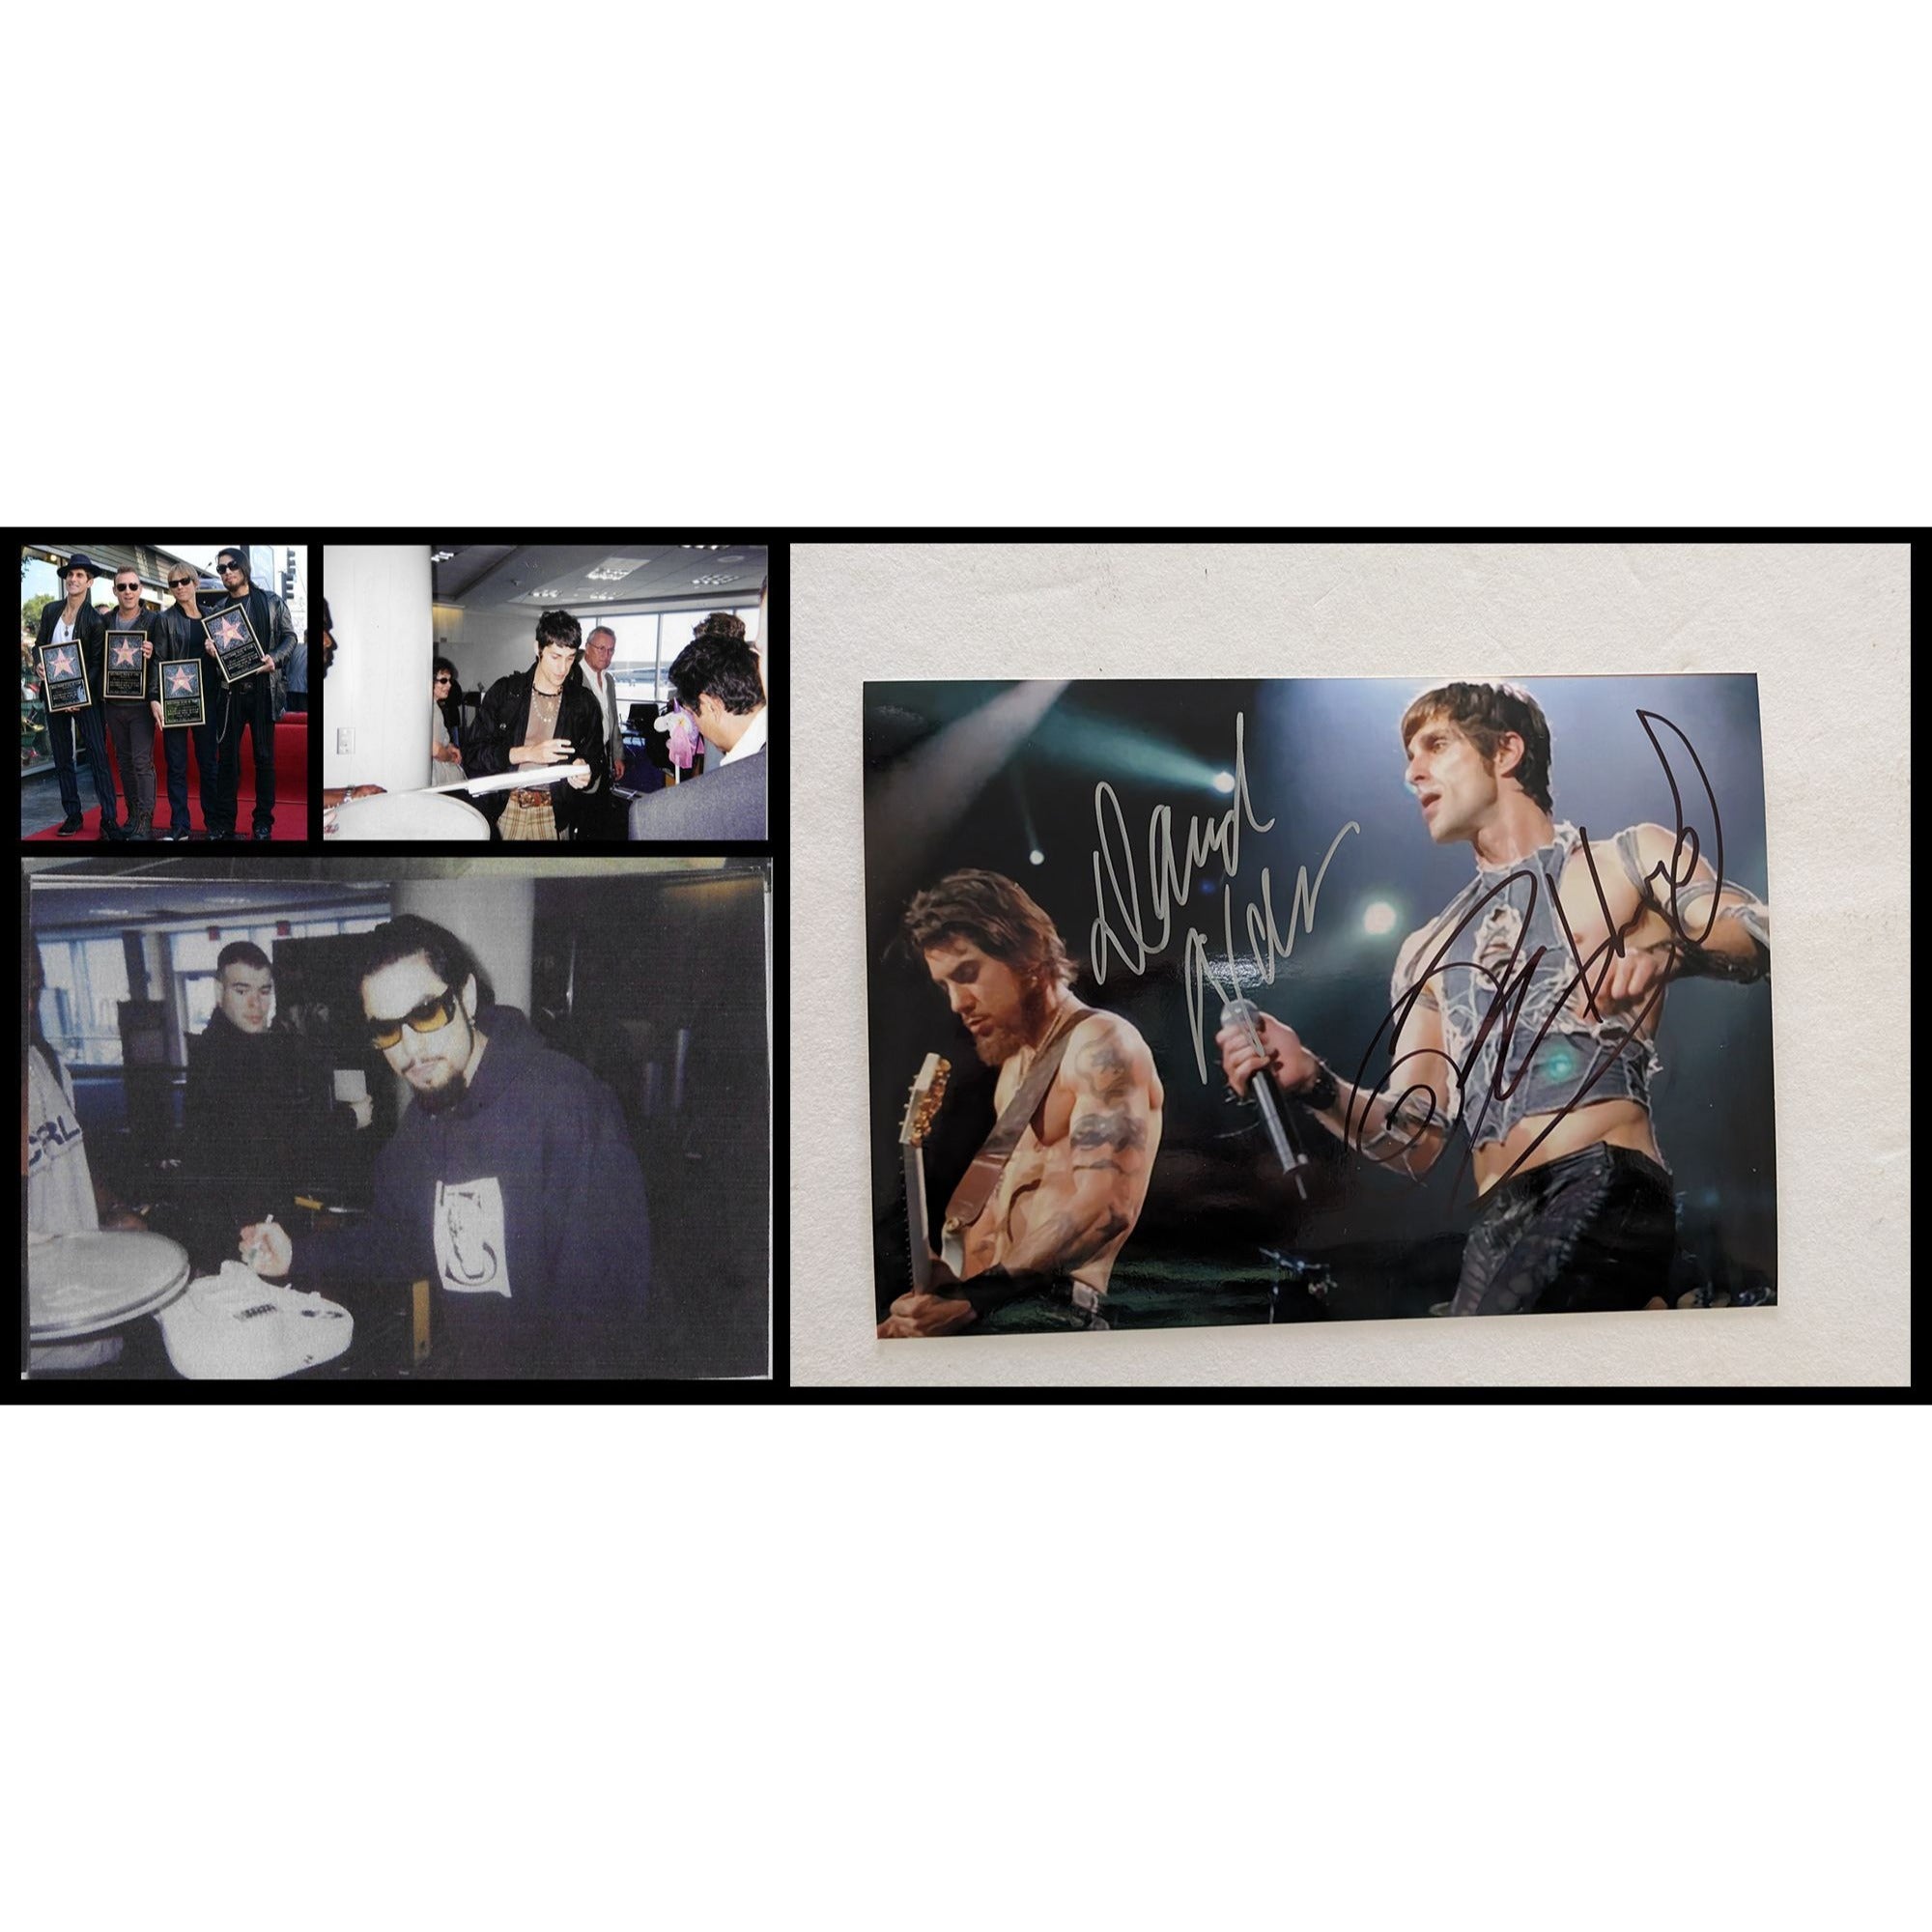 Perry Farrell Dave Navarro Jane's Addiction 5x7 photo signed with proof